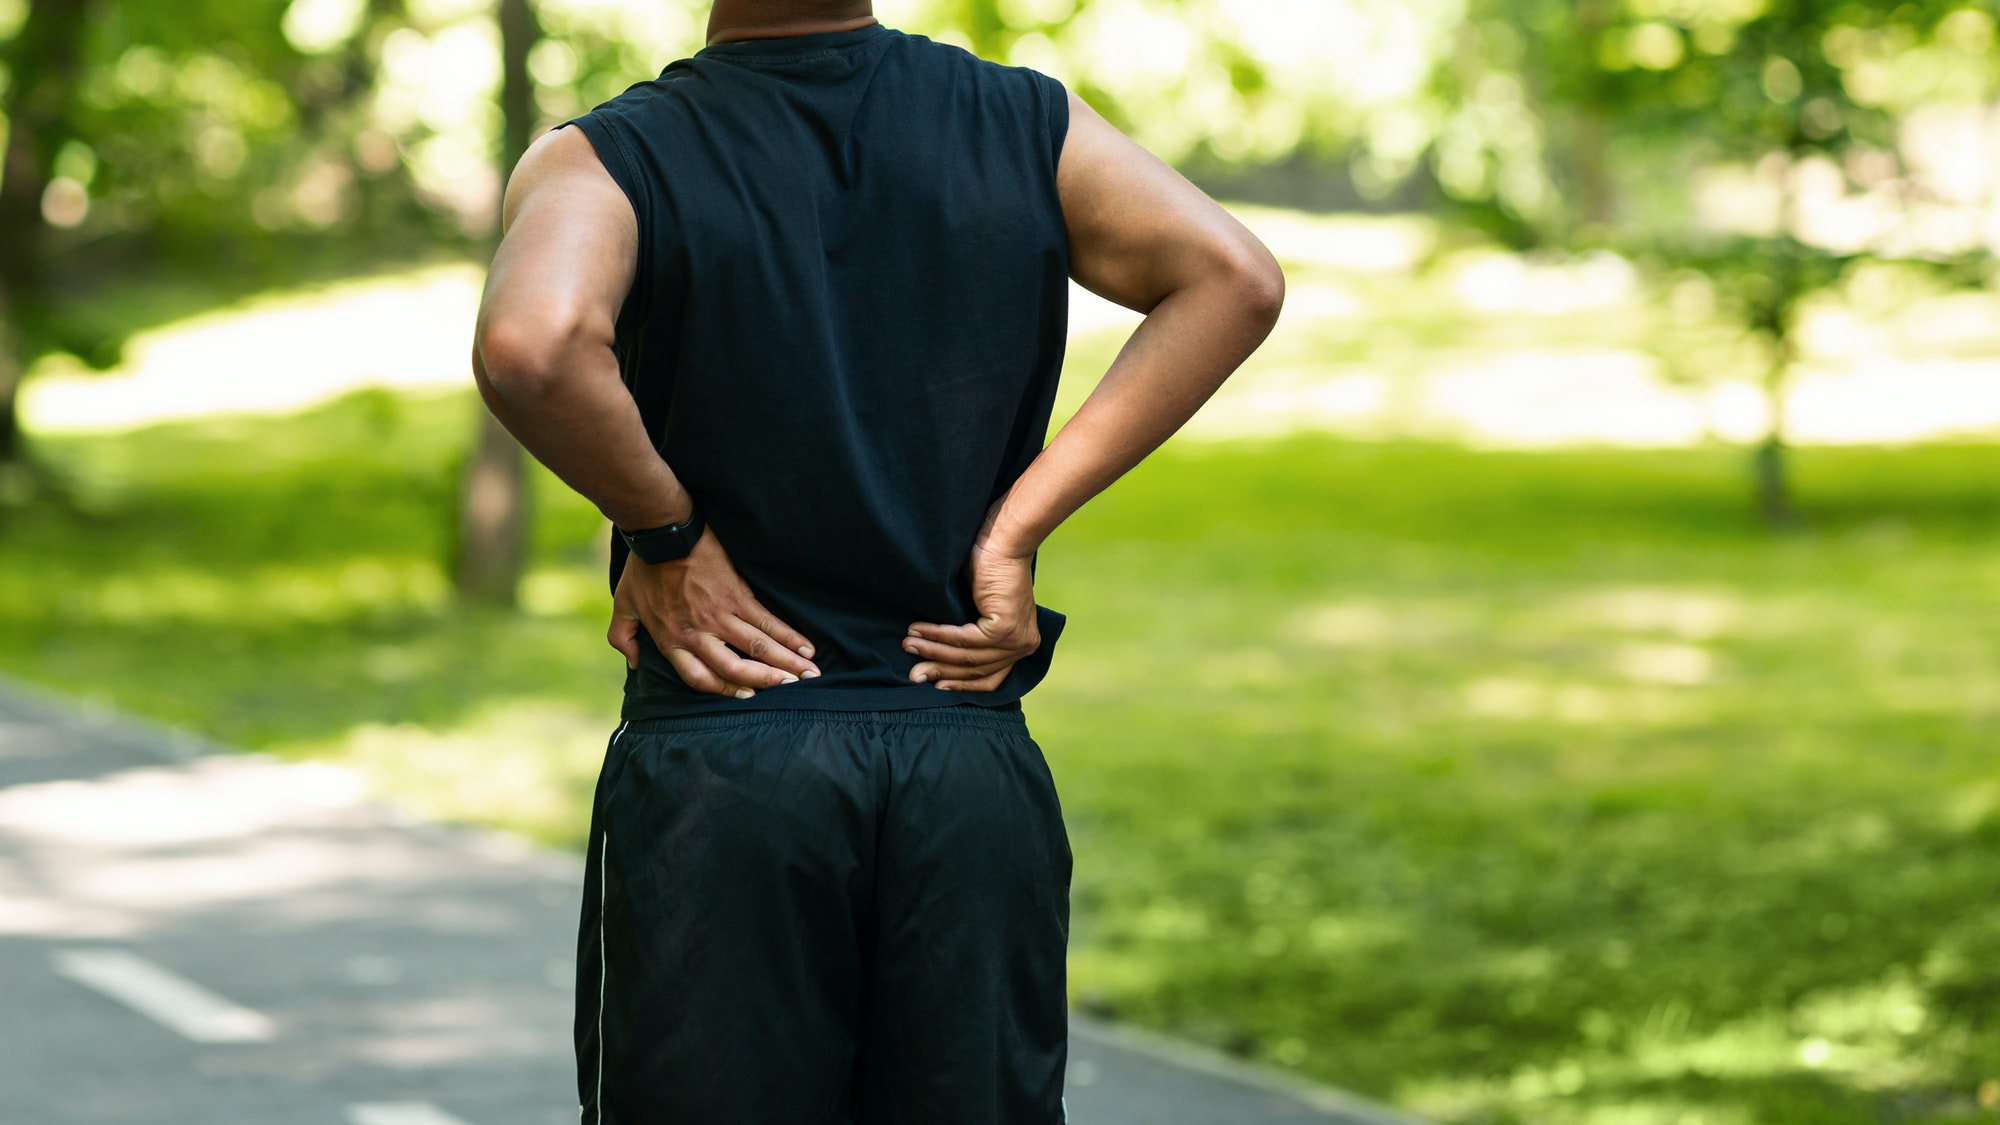 Lower Back Pain - Exercise is Medicine